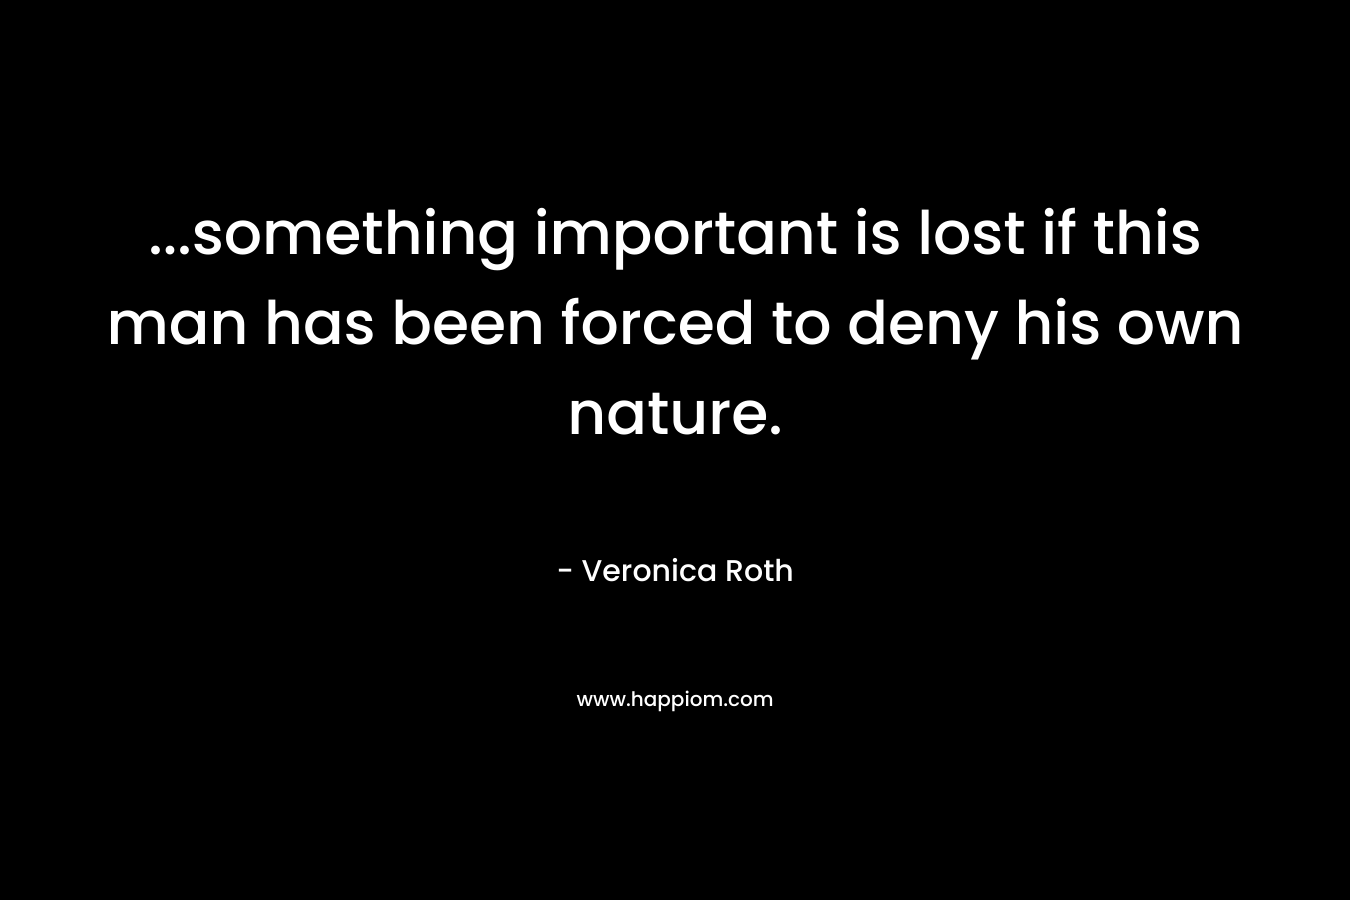 …something important is lost if this man has been forced to deny his own nature. – Veronica Roth